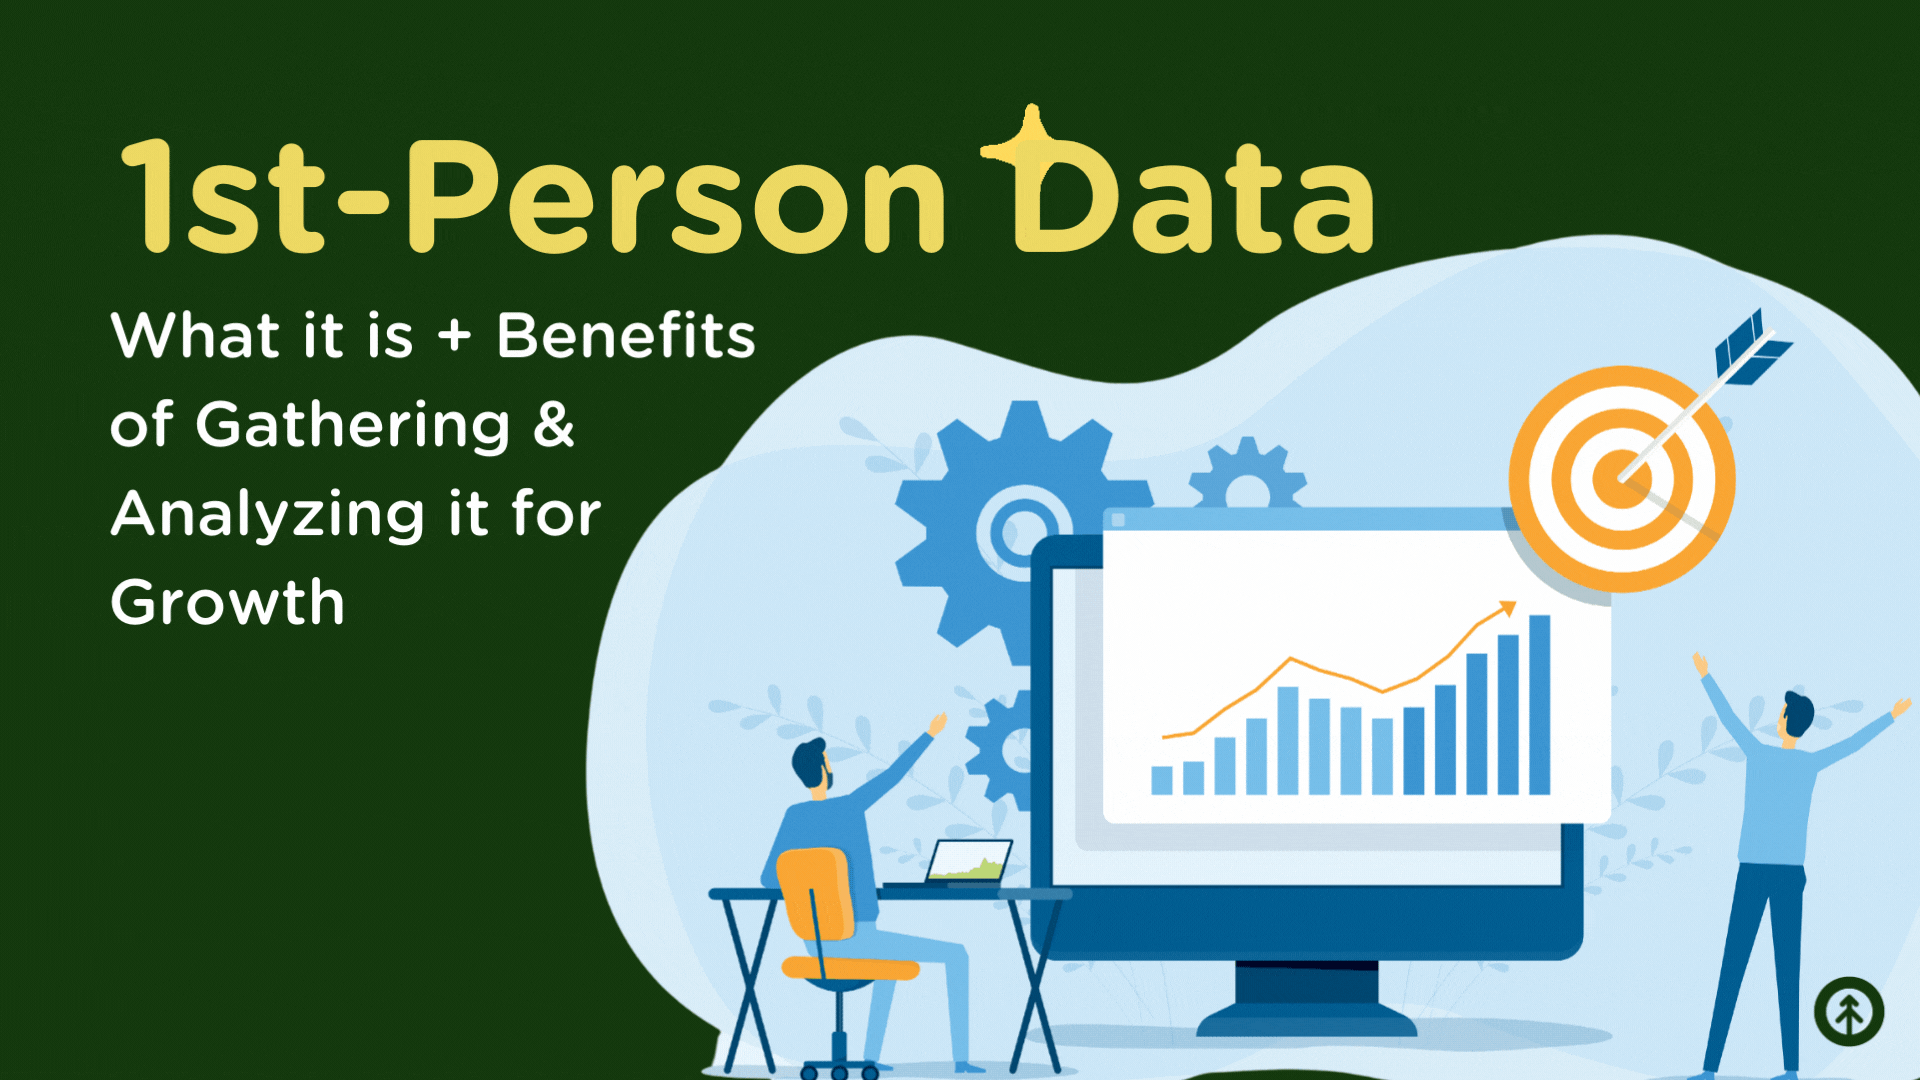 Top 3 Benefits of Gathering + Analyzing 1st-Person Data for Growth-featured-image